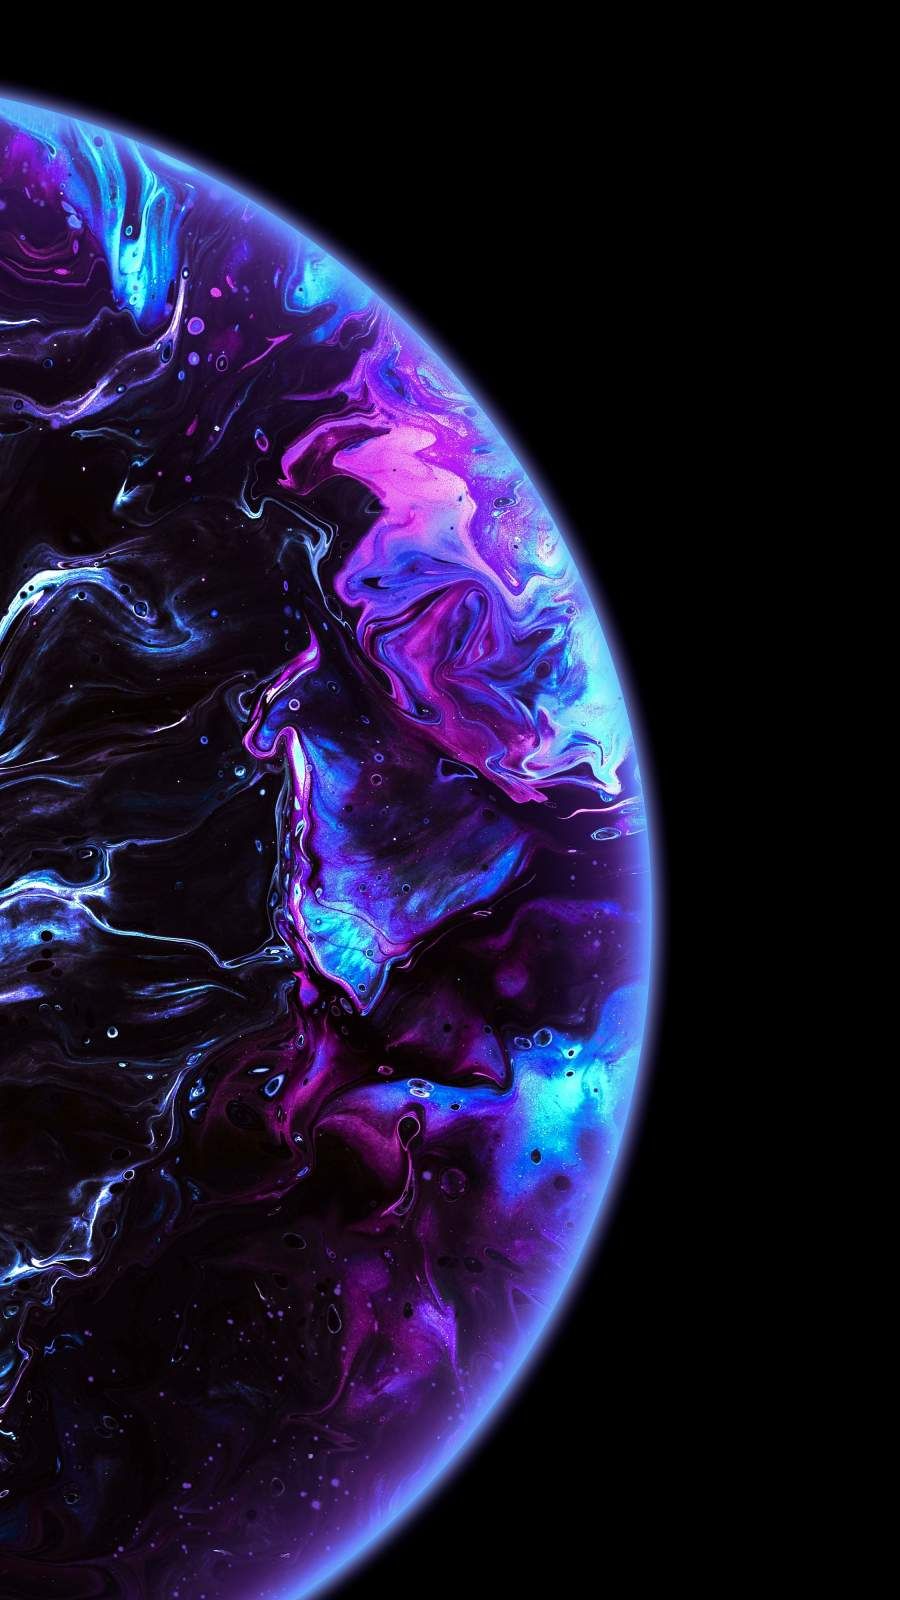 Sphere Marble Pla iPhone Wallpaper Space